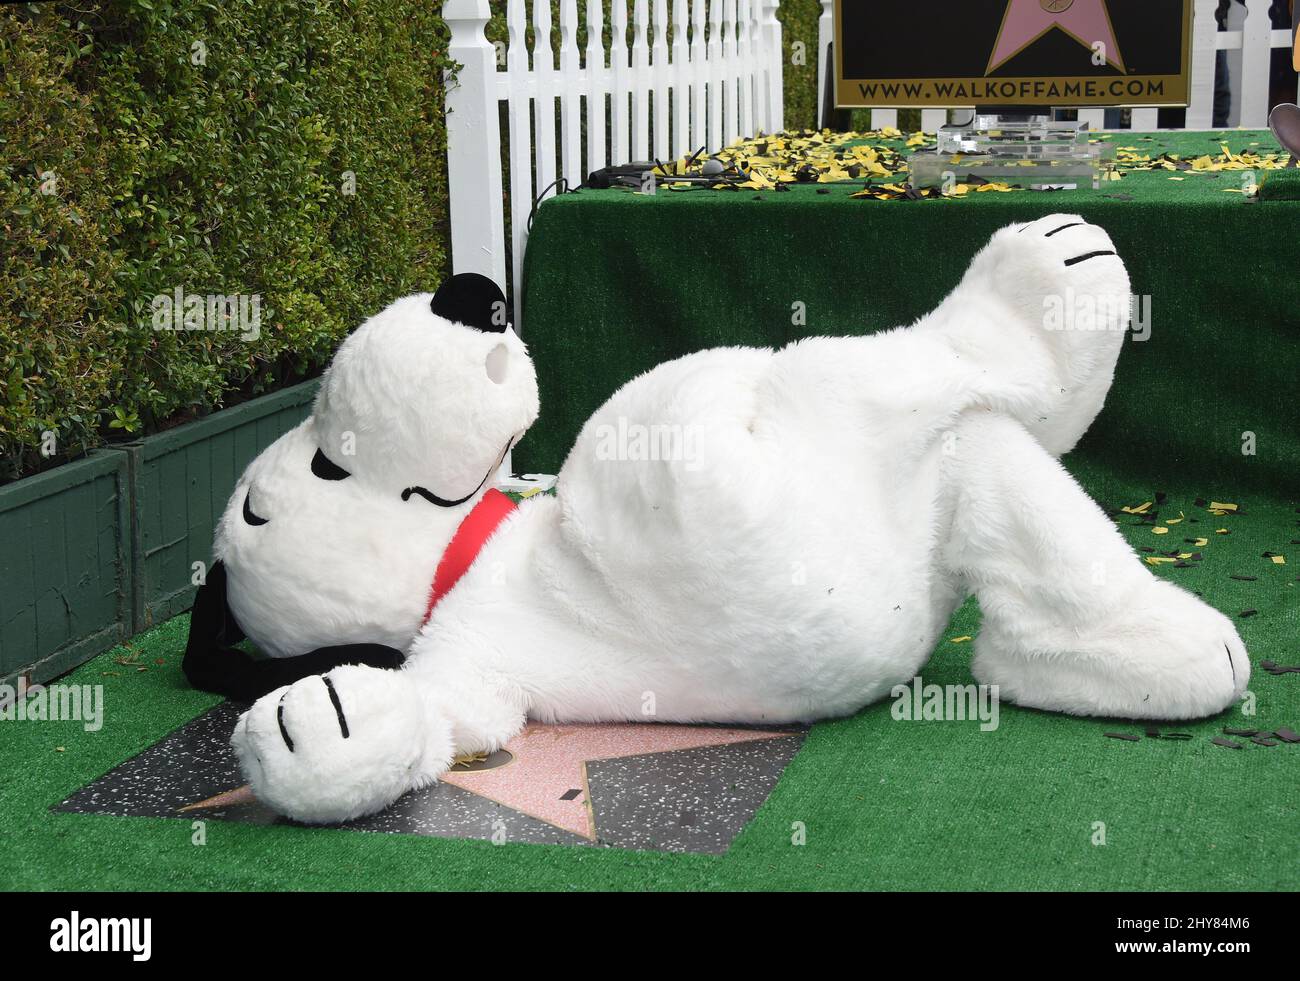 Snoopy Snoopy Hollywood Walk of Fame Star Ceremony. His star was placed next to his creator Charles M. Schulz' star. Stock Photo